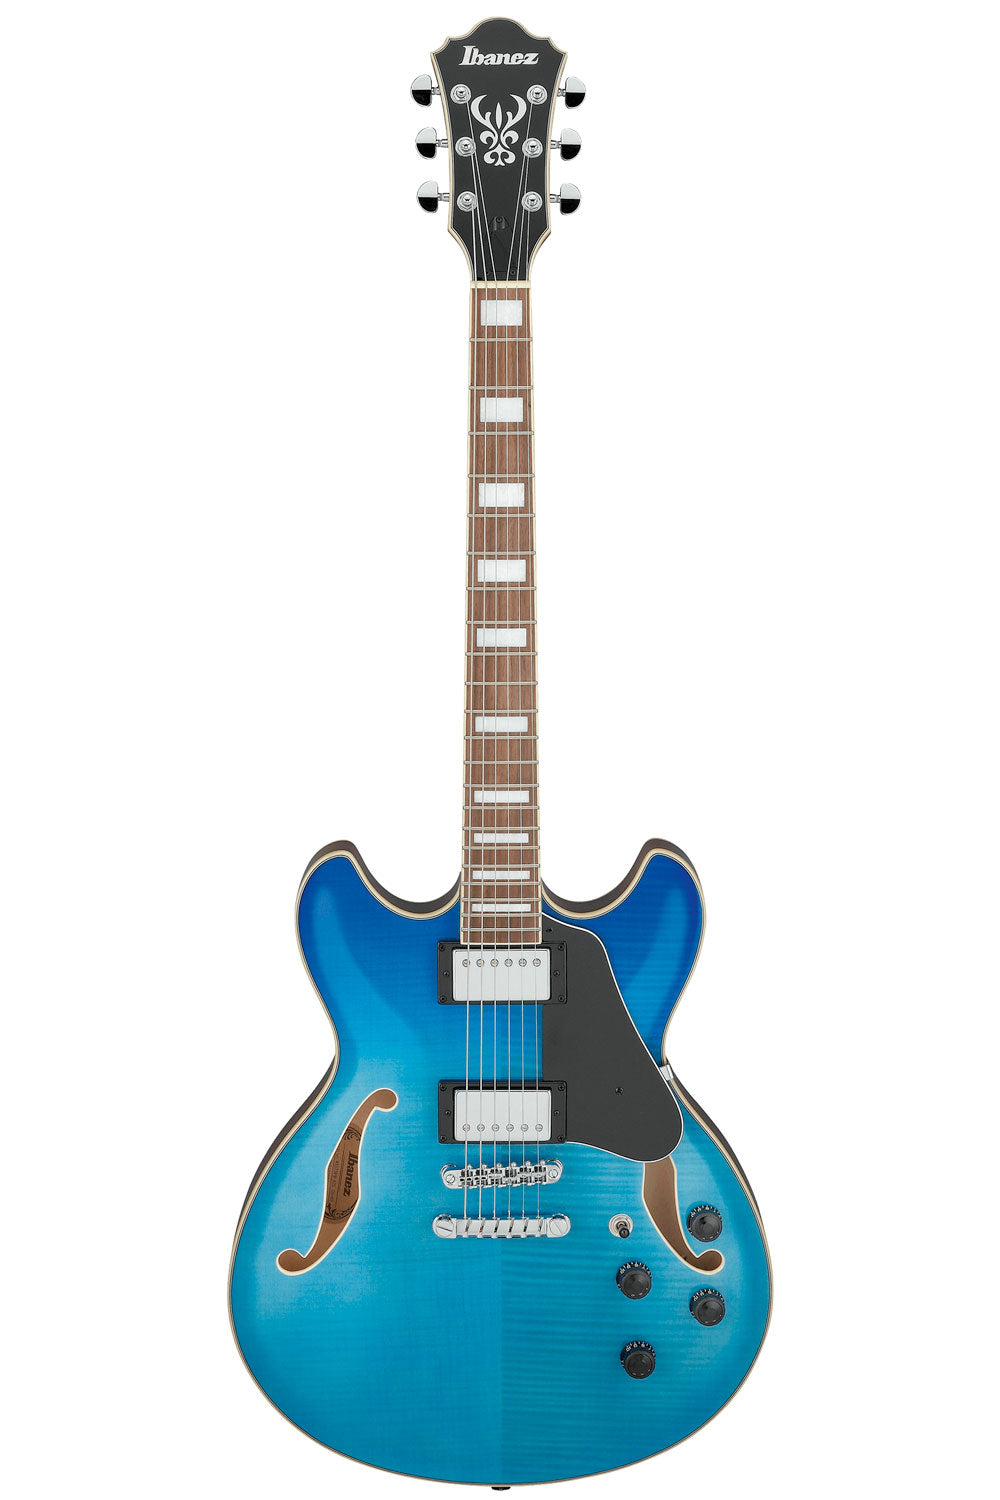 Ibanez AS73 Artcore Semi-Hollow Body Electric Guitar with Classic Elite Pickups - Azure Blue Gradation